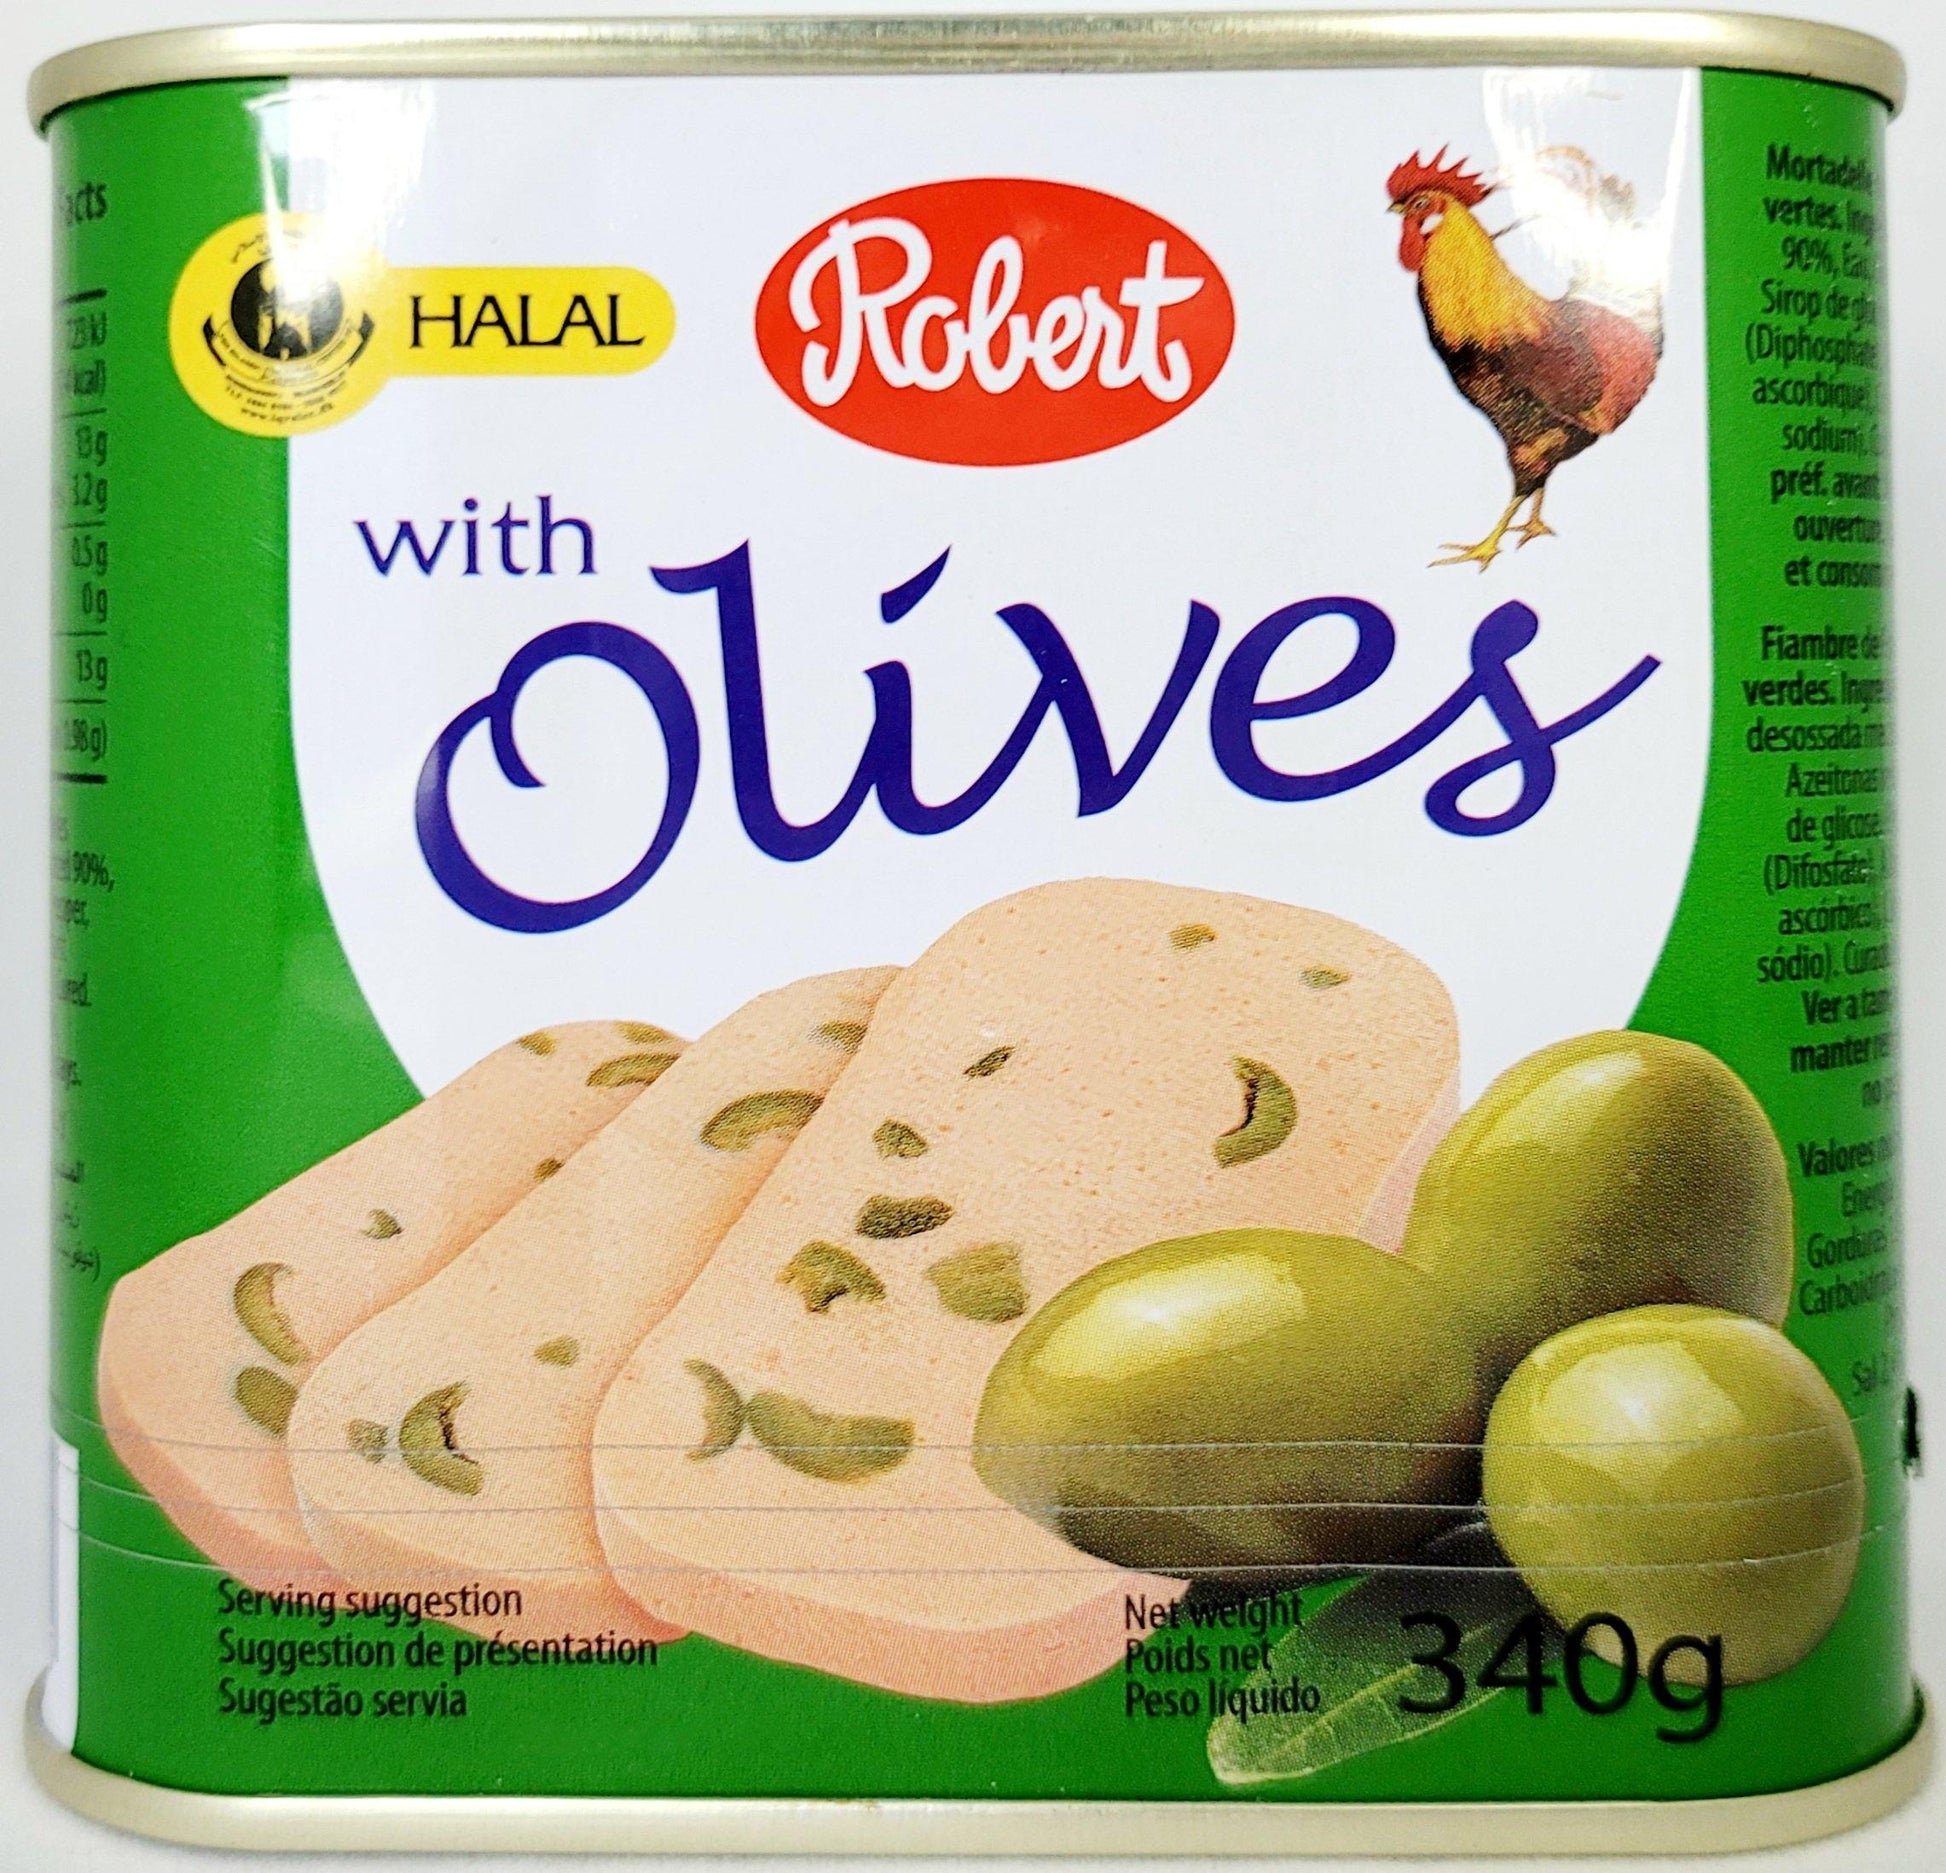 Robert Luncheon with Olives 340g - Arabian Shopping Zone